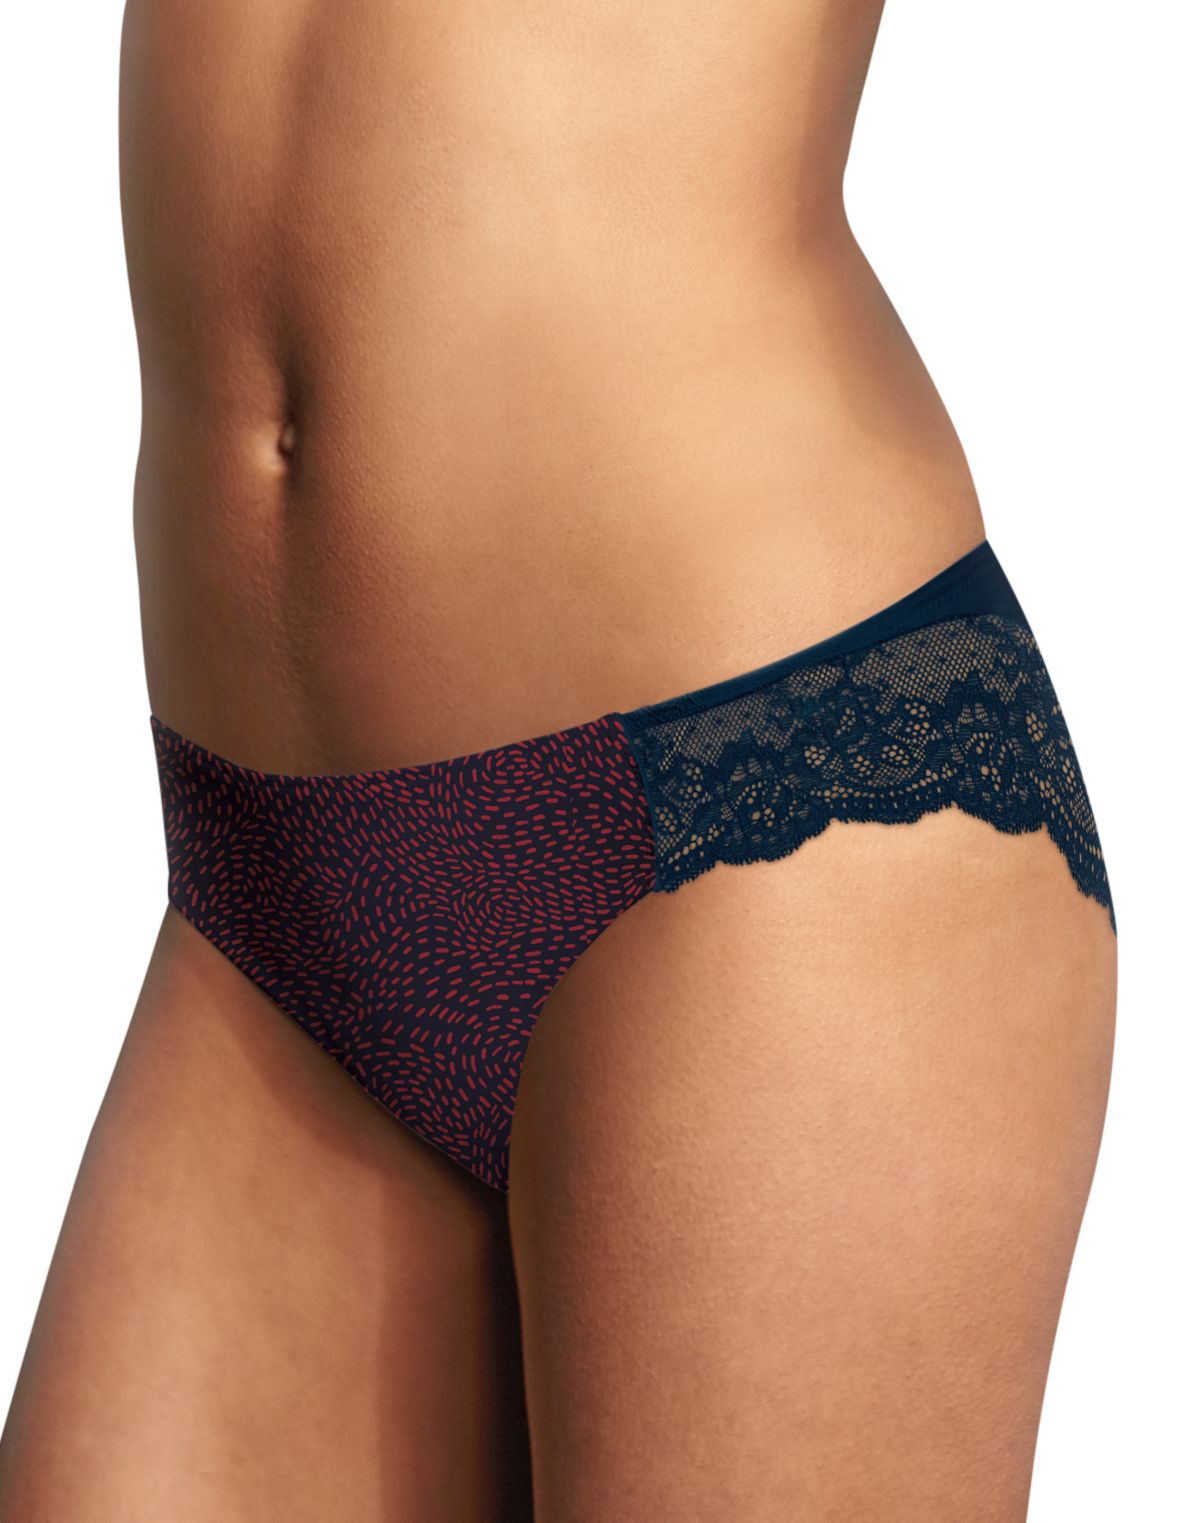 Maidenform Comfort Devotion Tailored Thong Panty